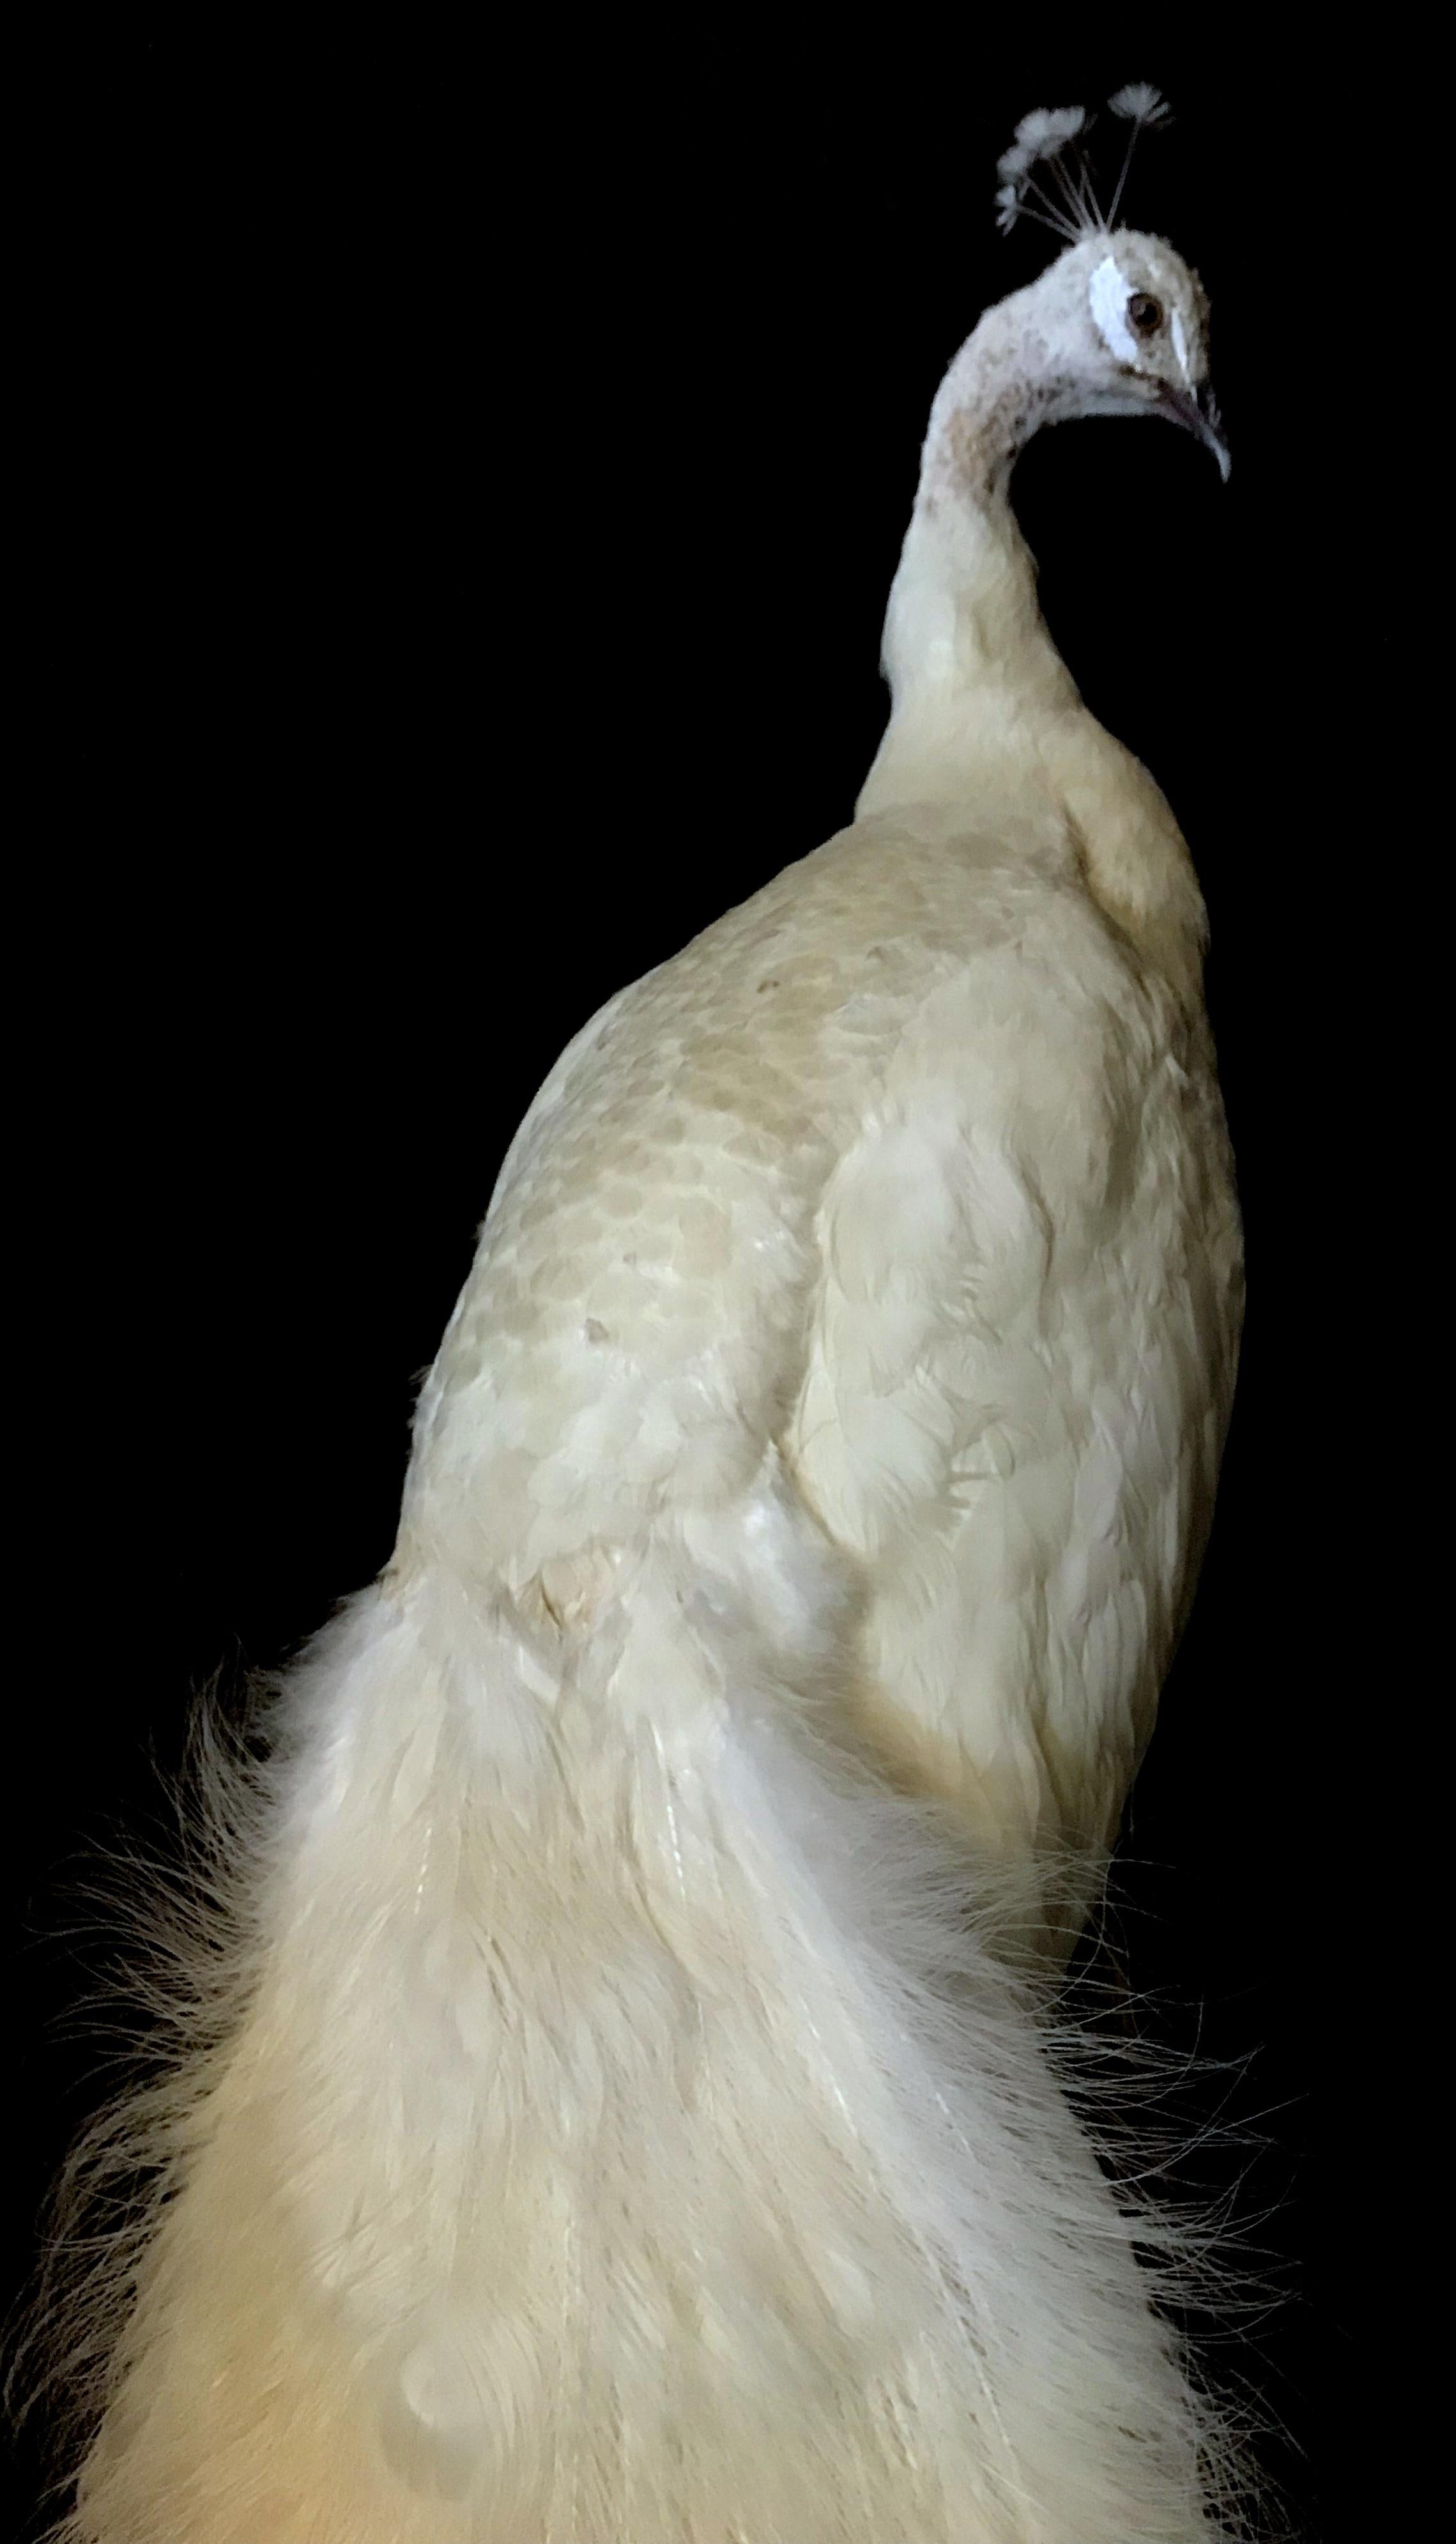 Newly made taxidermy white peacock. The peacock is made very life like with lots of details. It is placed on a stylish black base.